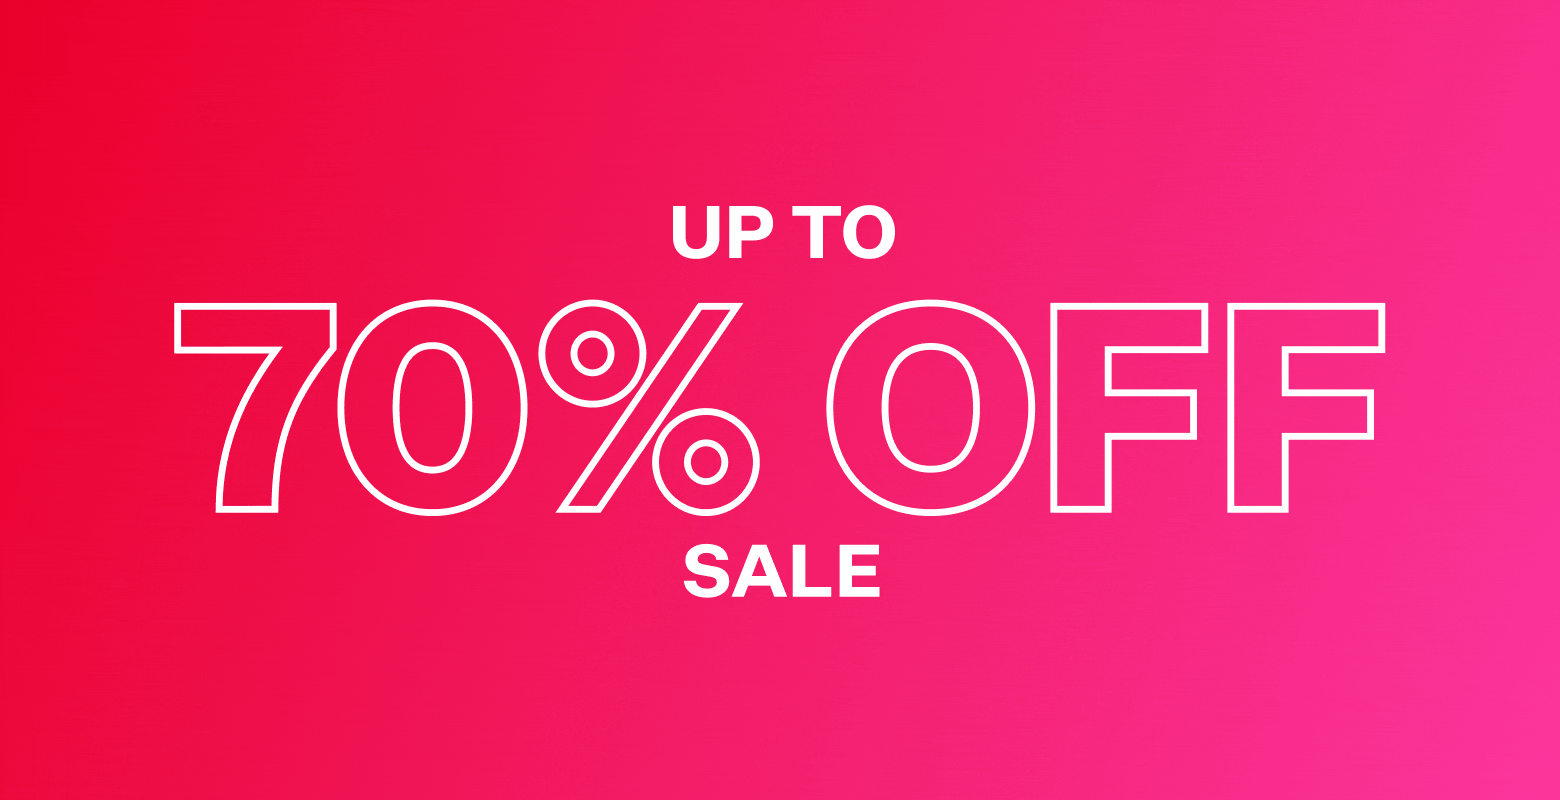 Up To 70% Off